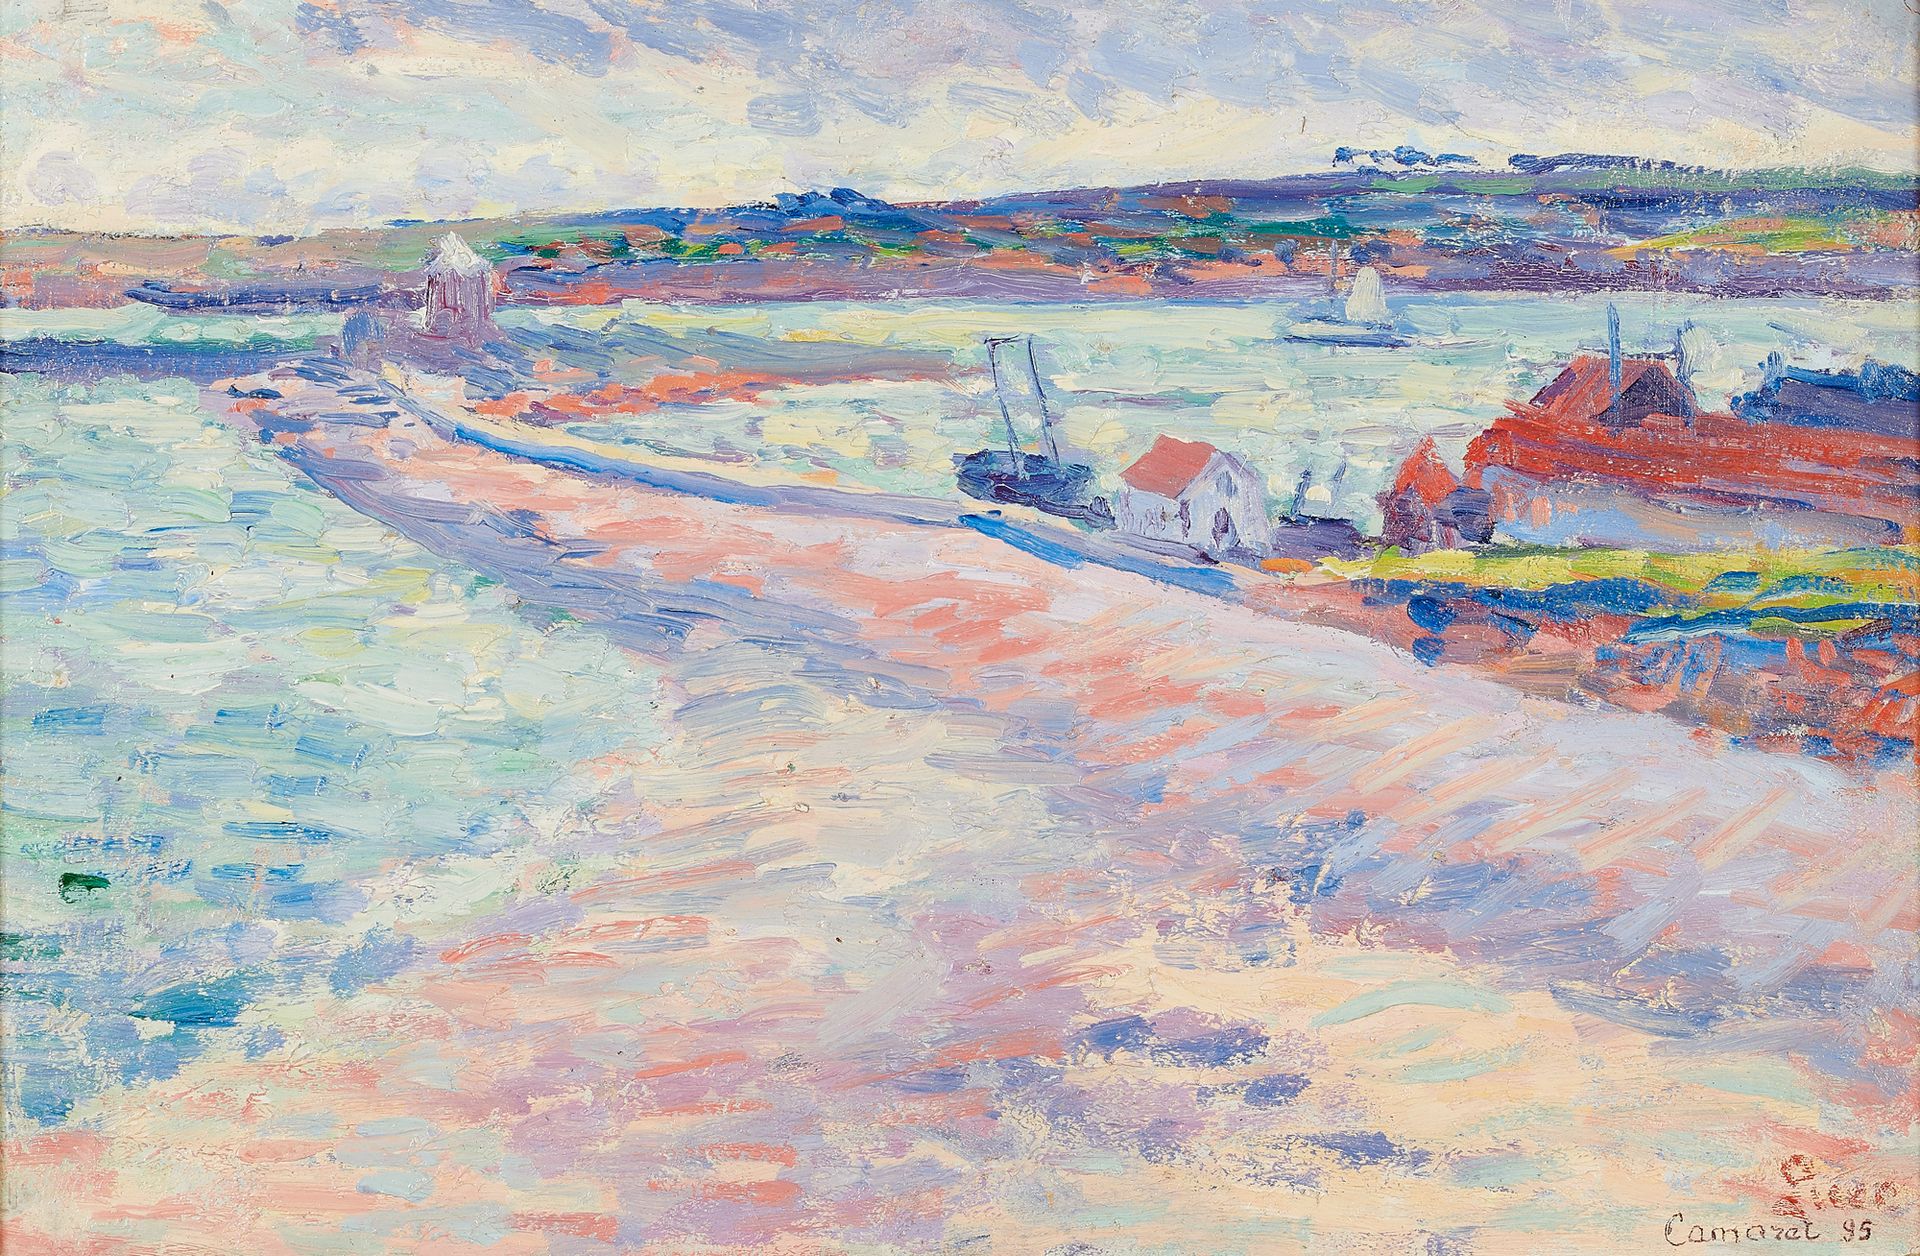 Maximilien Luce (1858-1941) Camaret, 1895
Oil on cardboard, signed and marked "C&hellip;